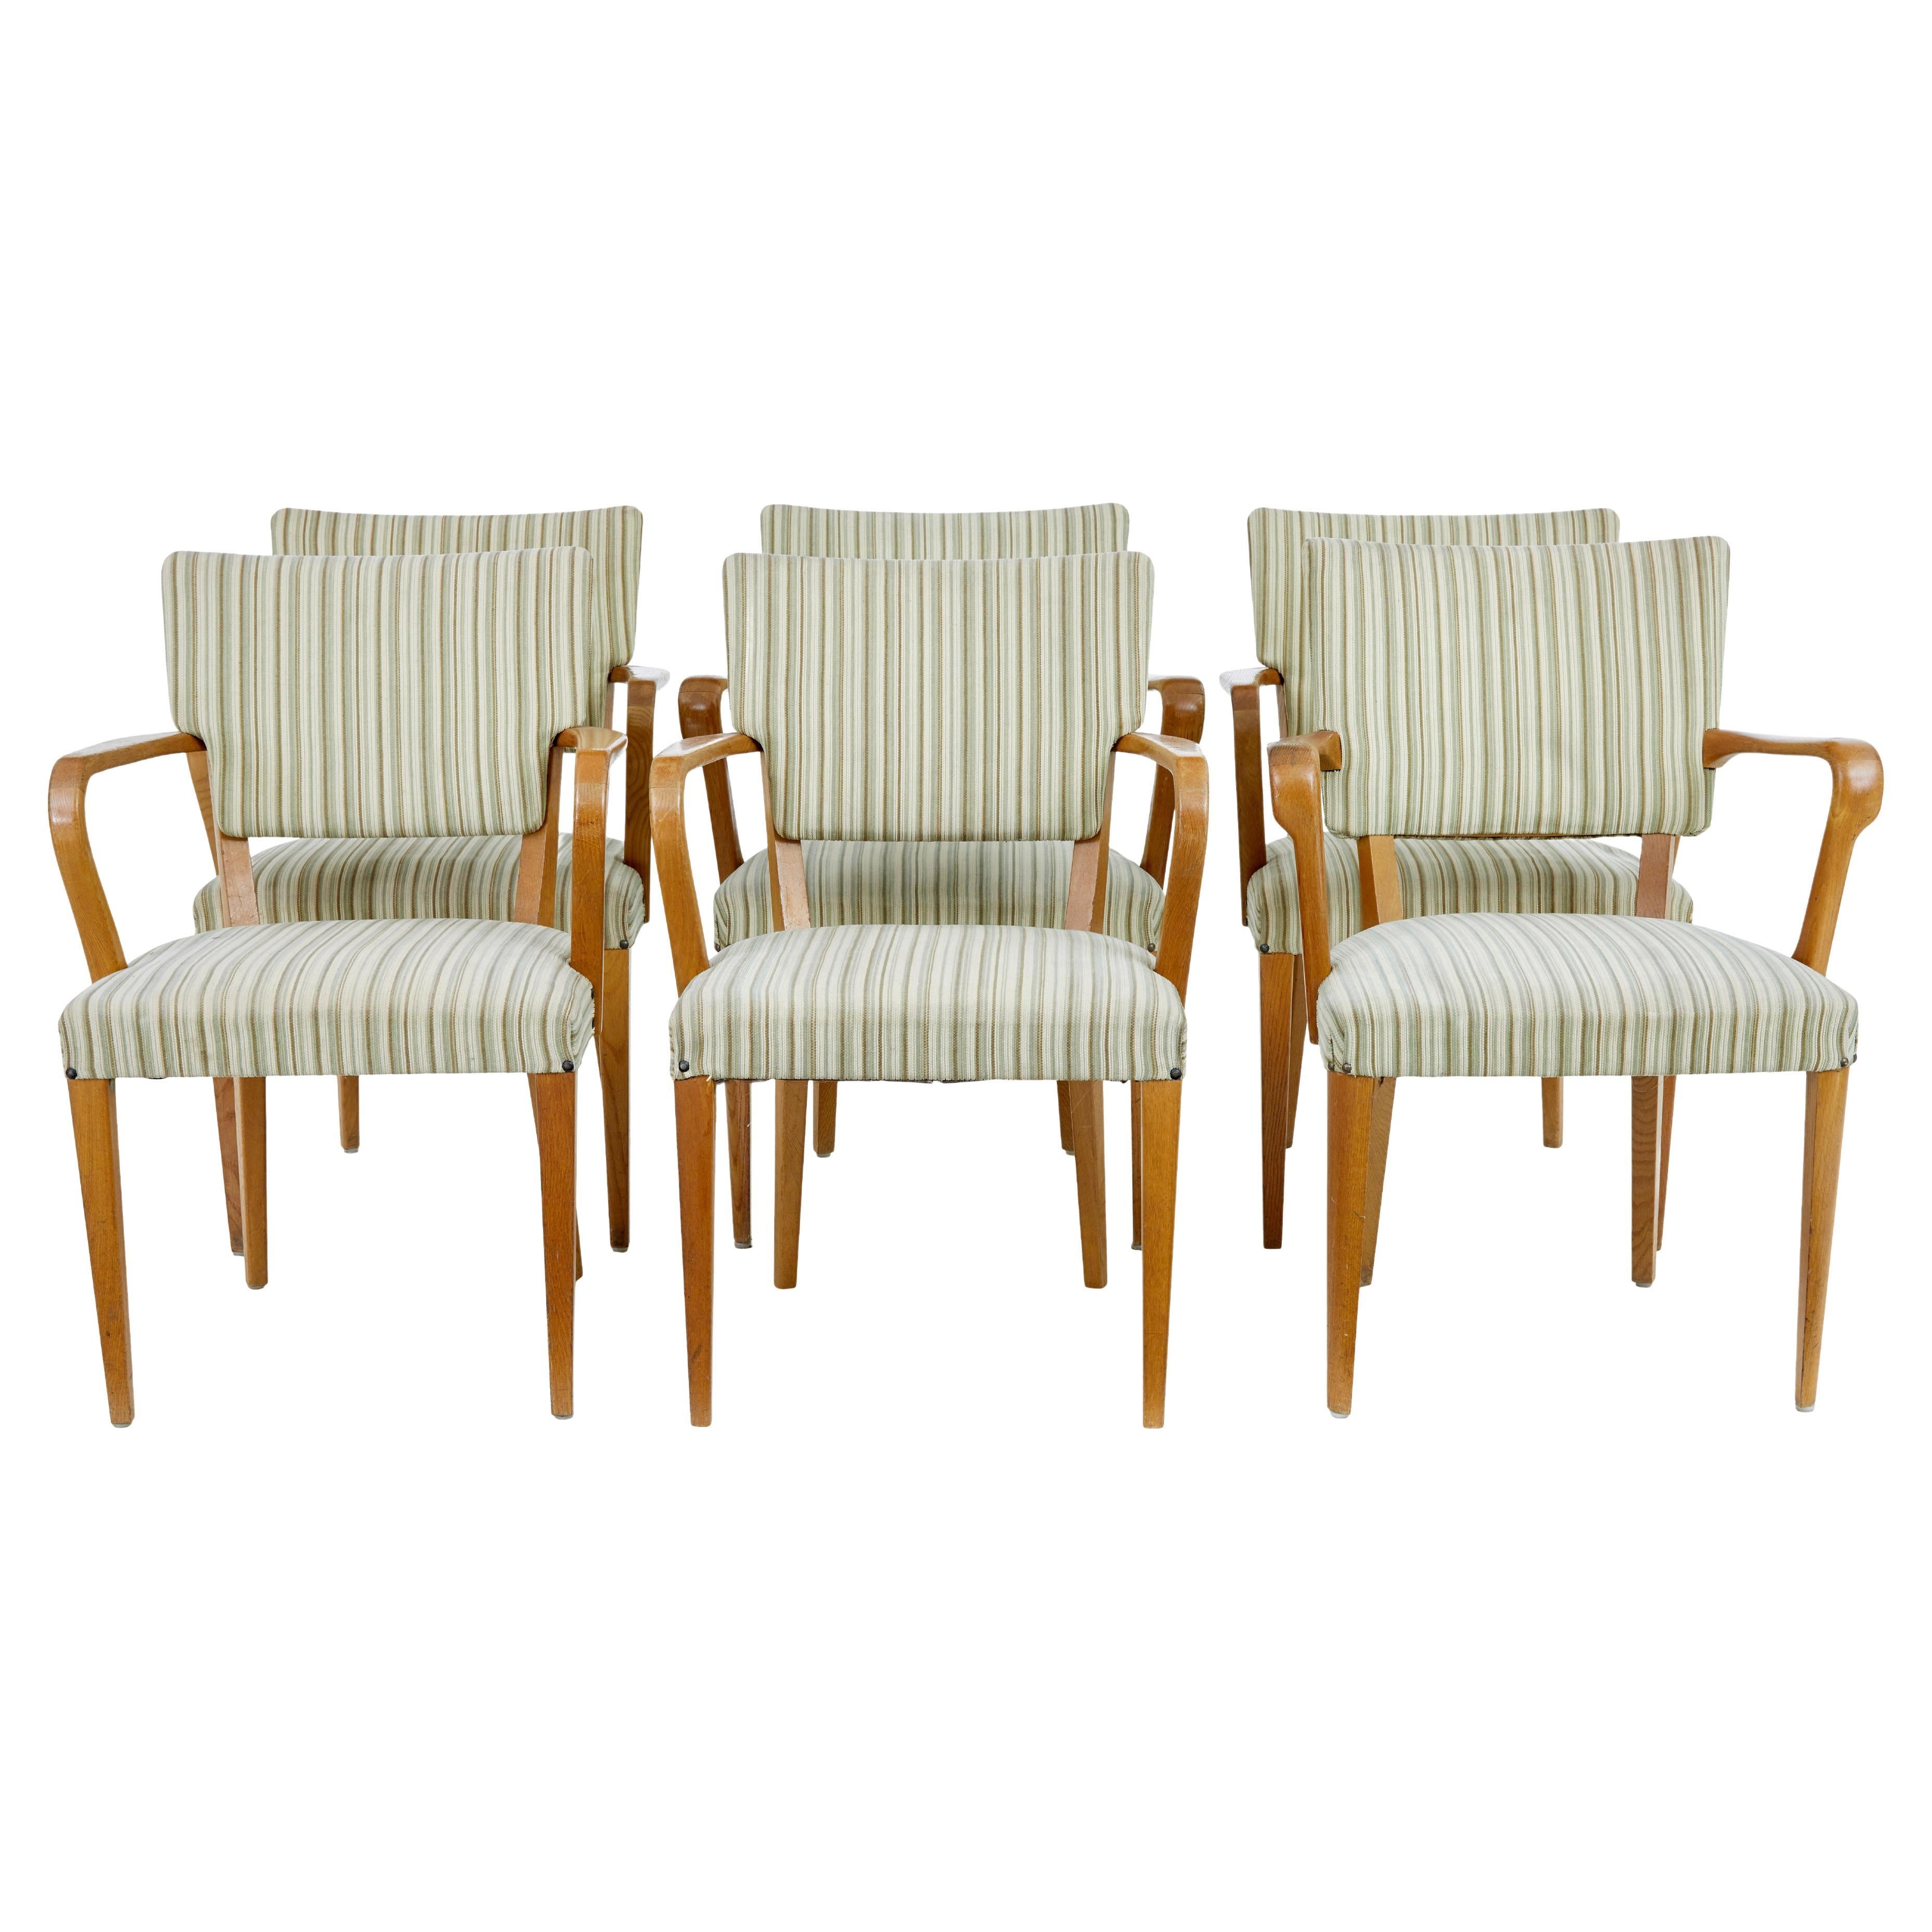 Harlequin set of 6 Swedish 1960’s armchairs by atvidabergs For Sale